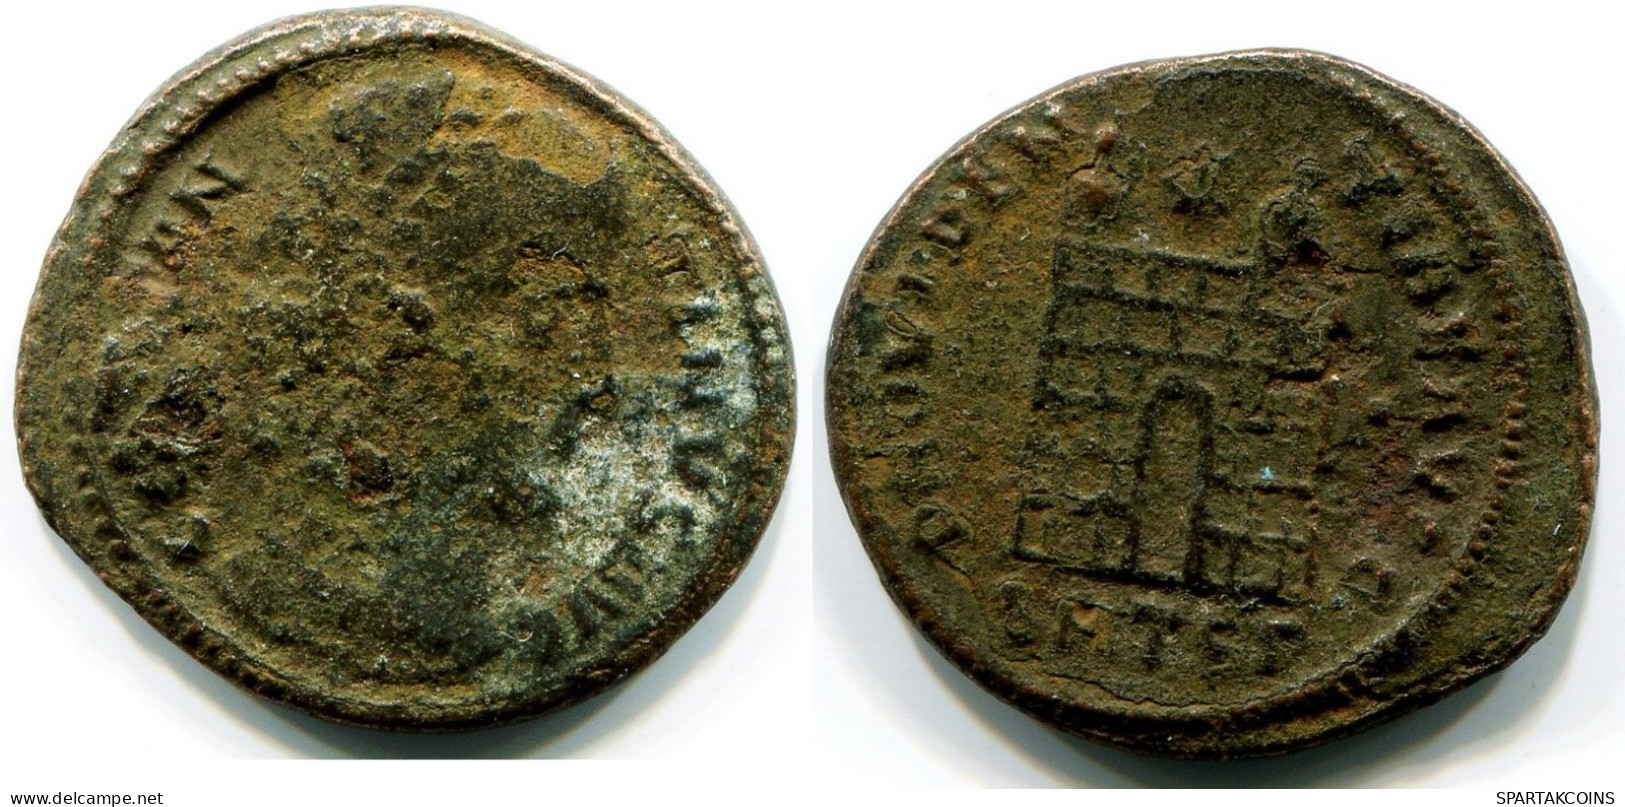 CONSTANTINE I MINTED IN THESSALONICA FOUND IN IHNASYAH HOARD #ANC11136.14.F.A - The Christian Empire (307 AD Tot 363 AD)